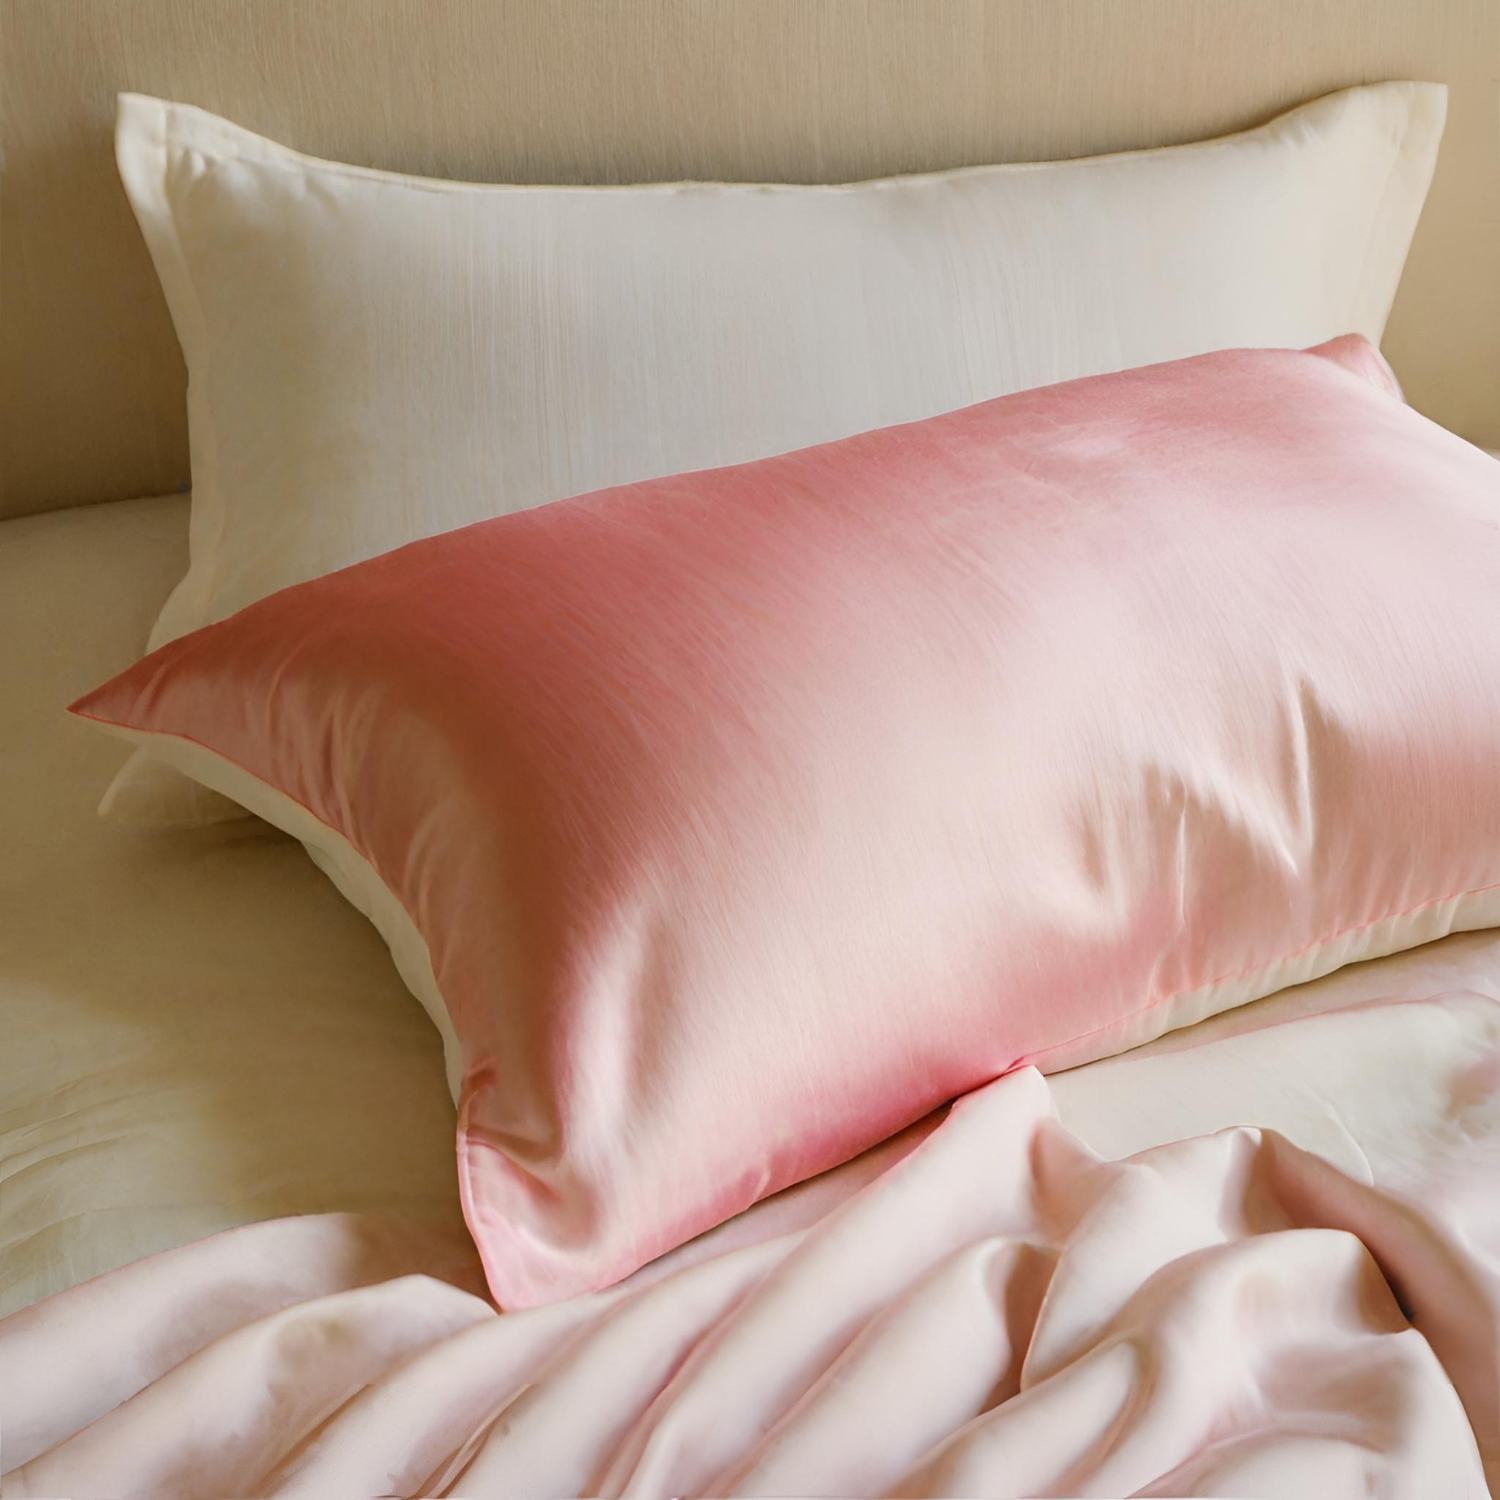 Benefits of Silk, satin, and cotton pillow cases. Which one to use